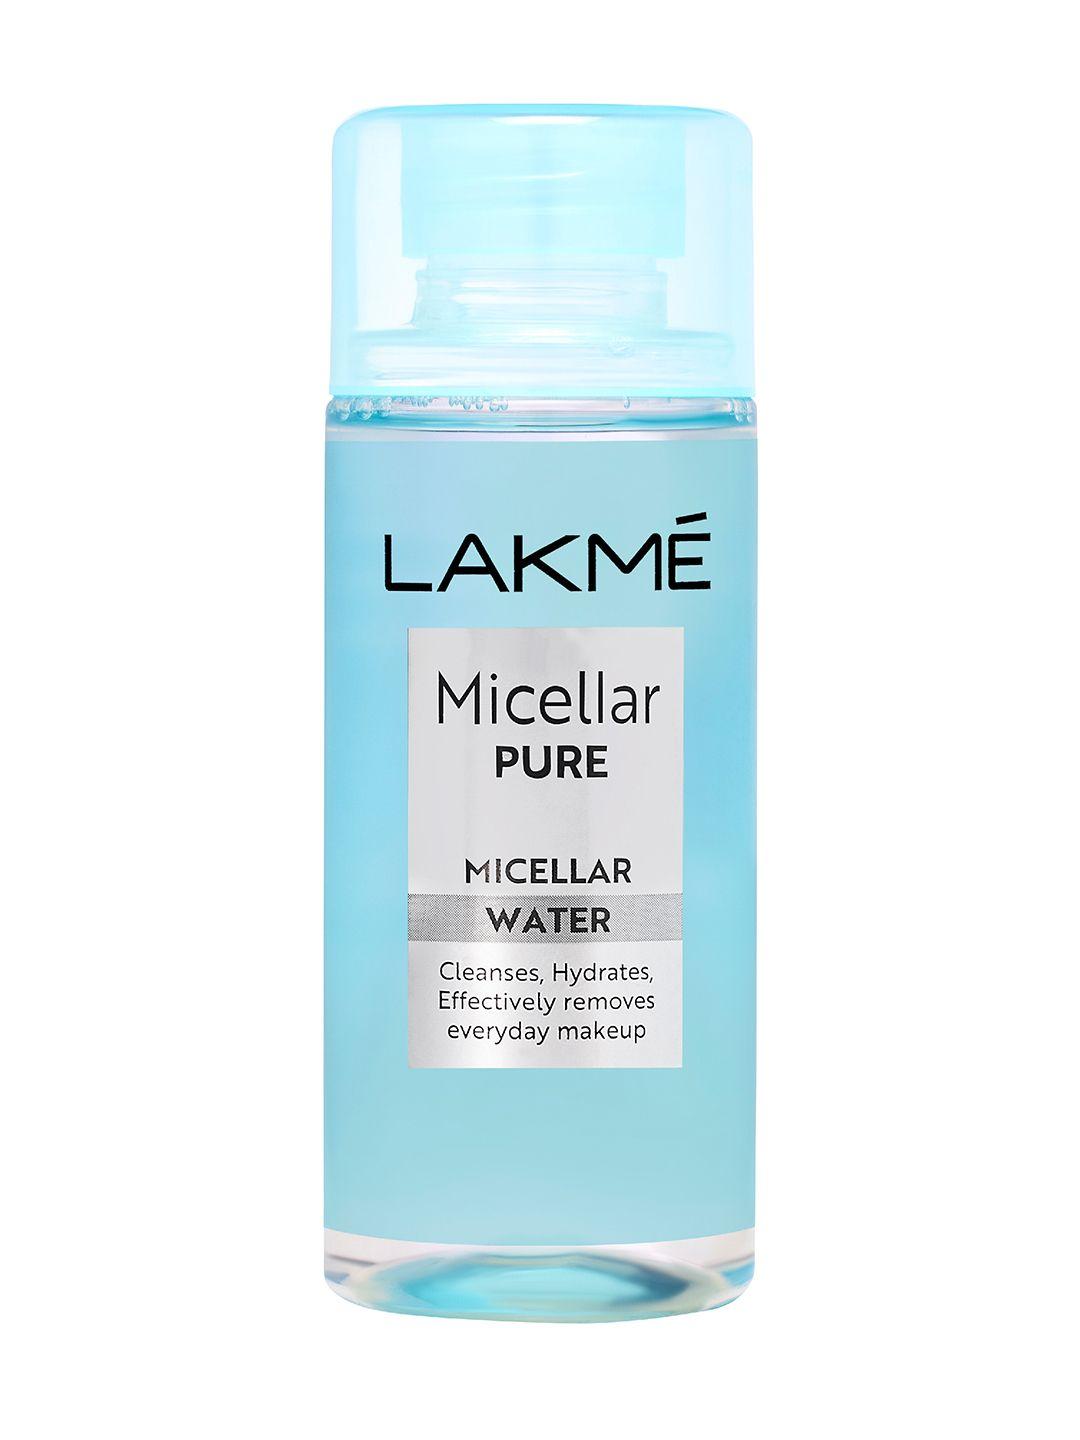 lakme pure micellar water makeup remover - 100 ml